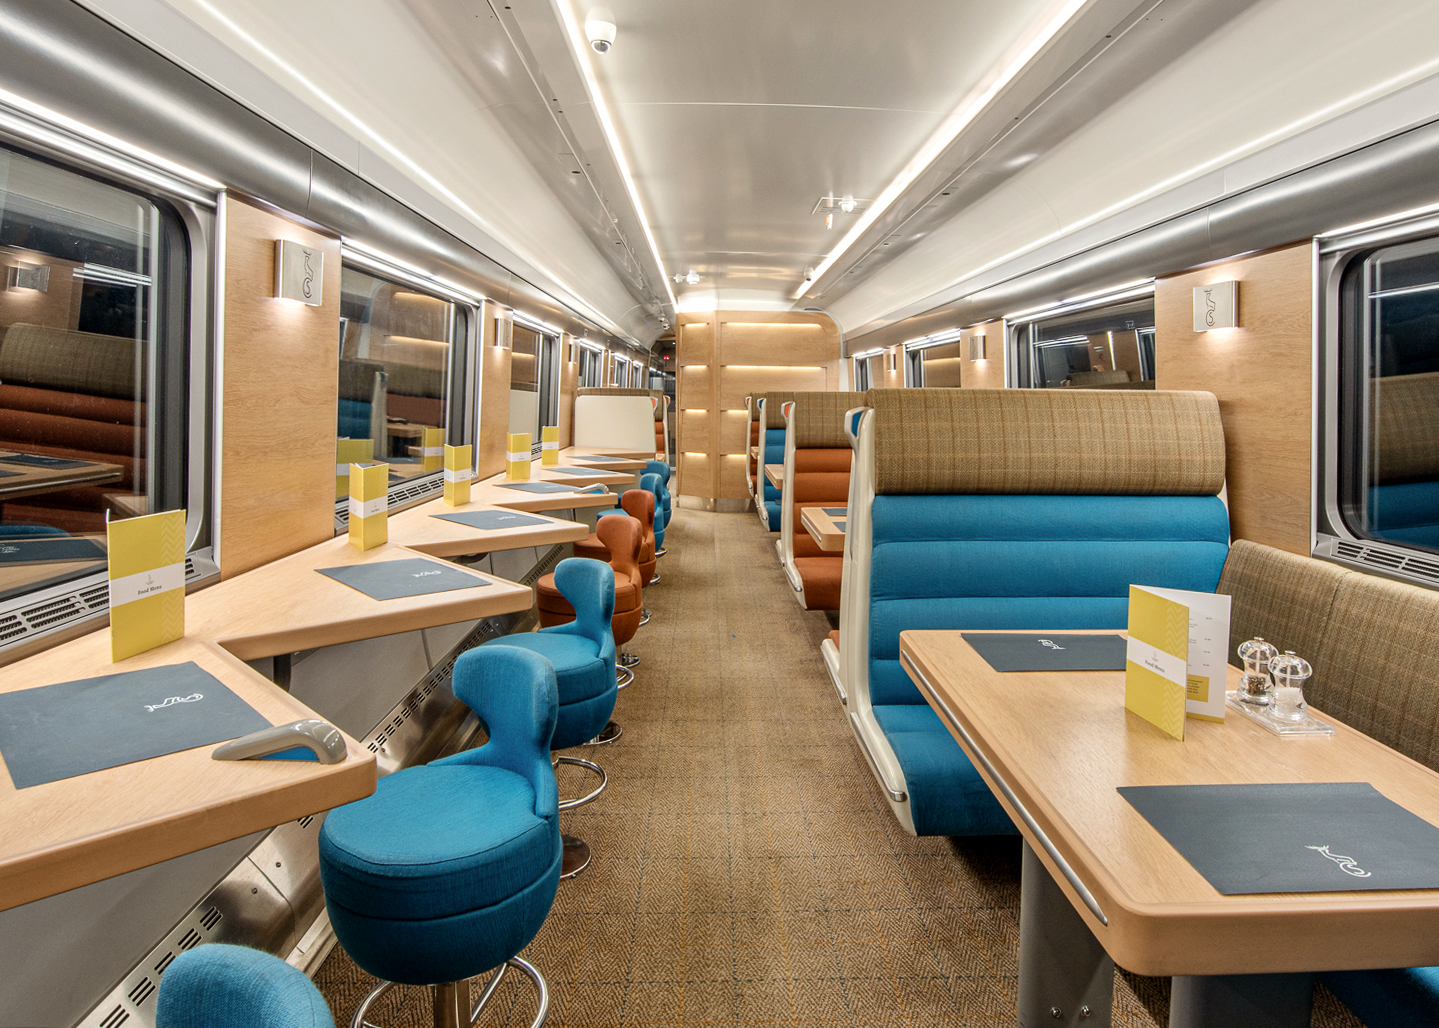 Food car in a luxury train that travels between London and Inverness